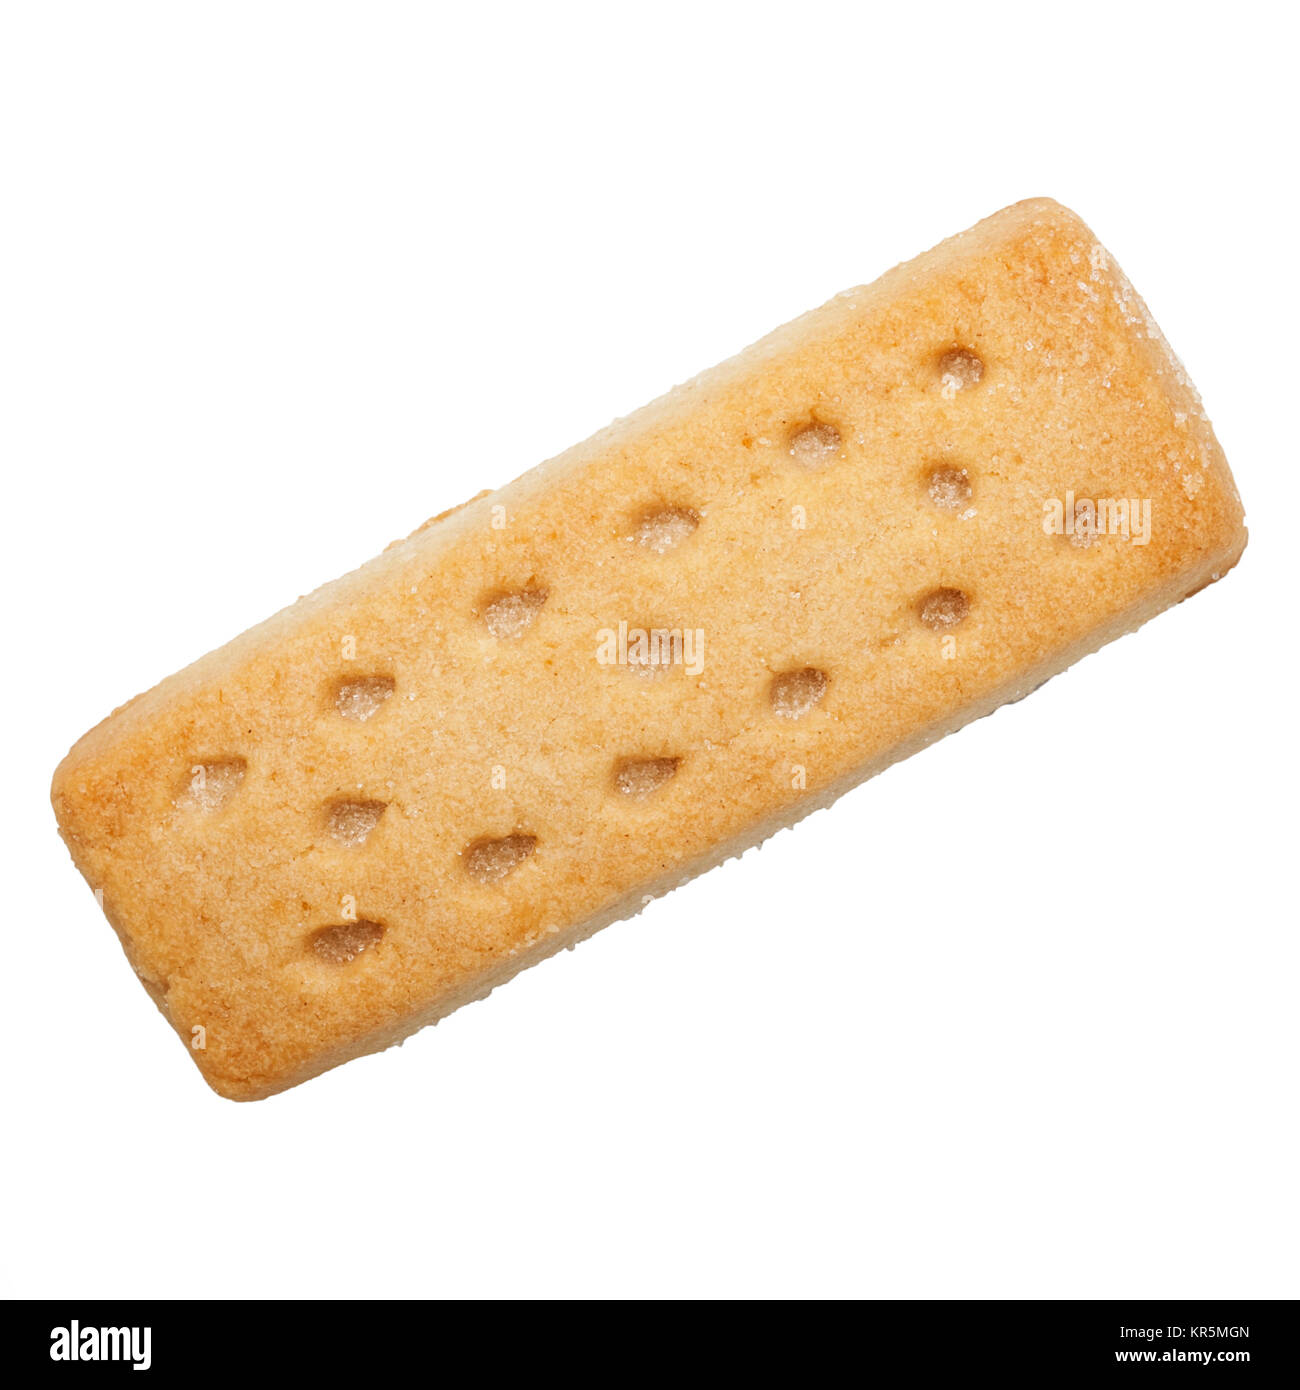 A shortbread finger biscuit on a white background Stock Photo